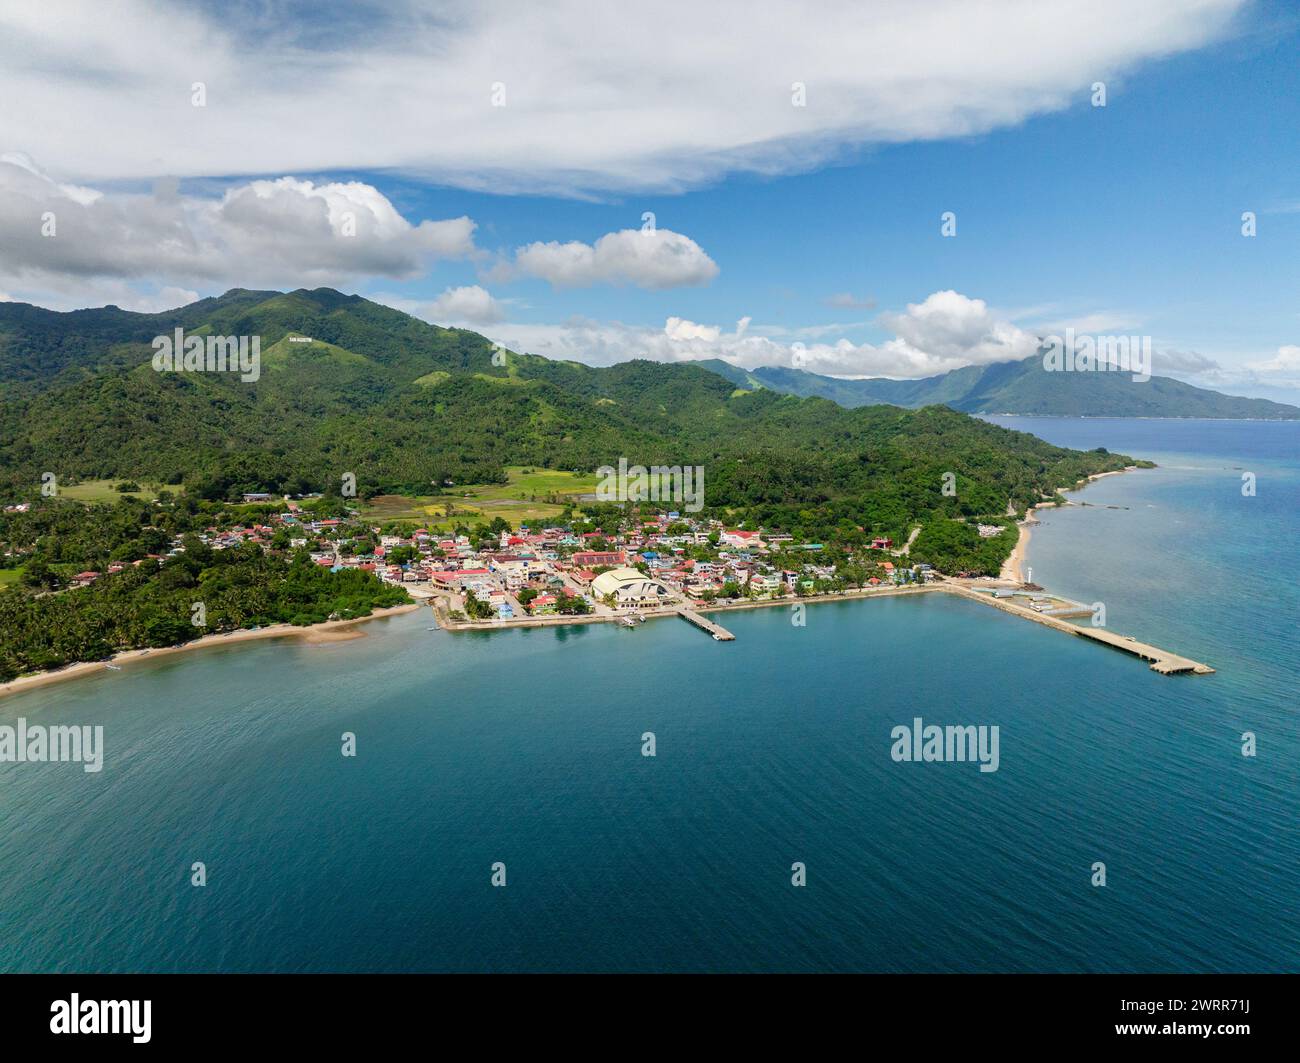 City with buildings and ports in San Agustin. Tablas Island. Romblon, Philippines. Stock Photo